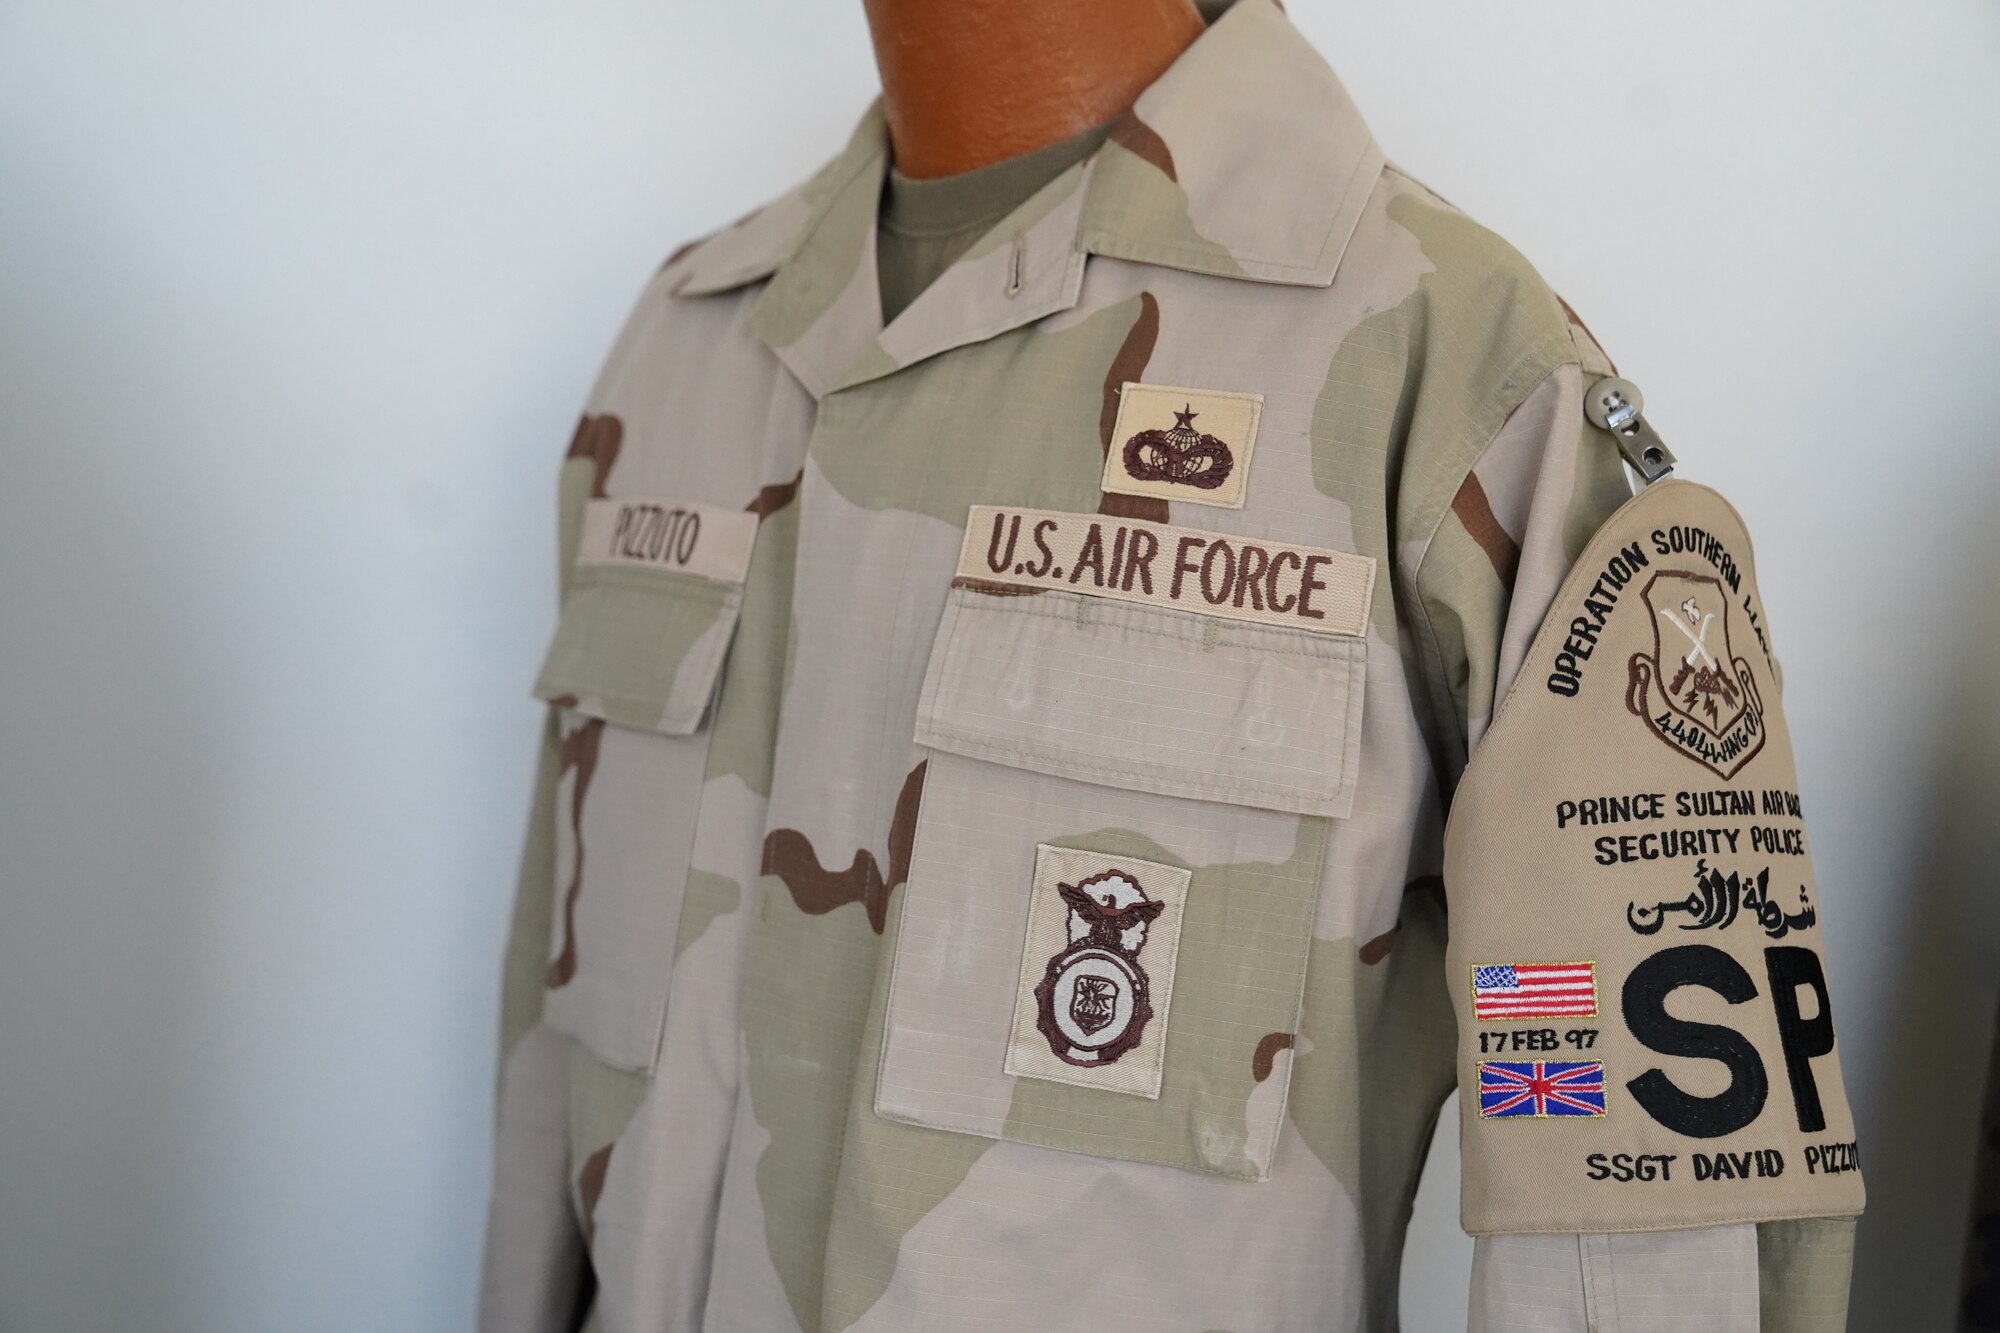 A Desert Camouflage Uniform owned by Chief Master Sgt. David Pizzuto, 81st Training Wing command chief, is displayed inside of the Levitow Training Support Facility at Keesler Air Force Base, Mississippi, May 6, 2020. Pizzuto, who is slated to retire this month, has served for 37 years and has worn every uniform the Air Force has ever known. (U.S. Air Force photo by Airman 1st Class Spencer Tobler)